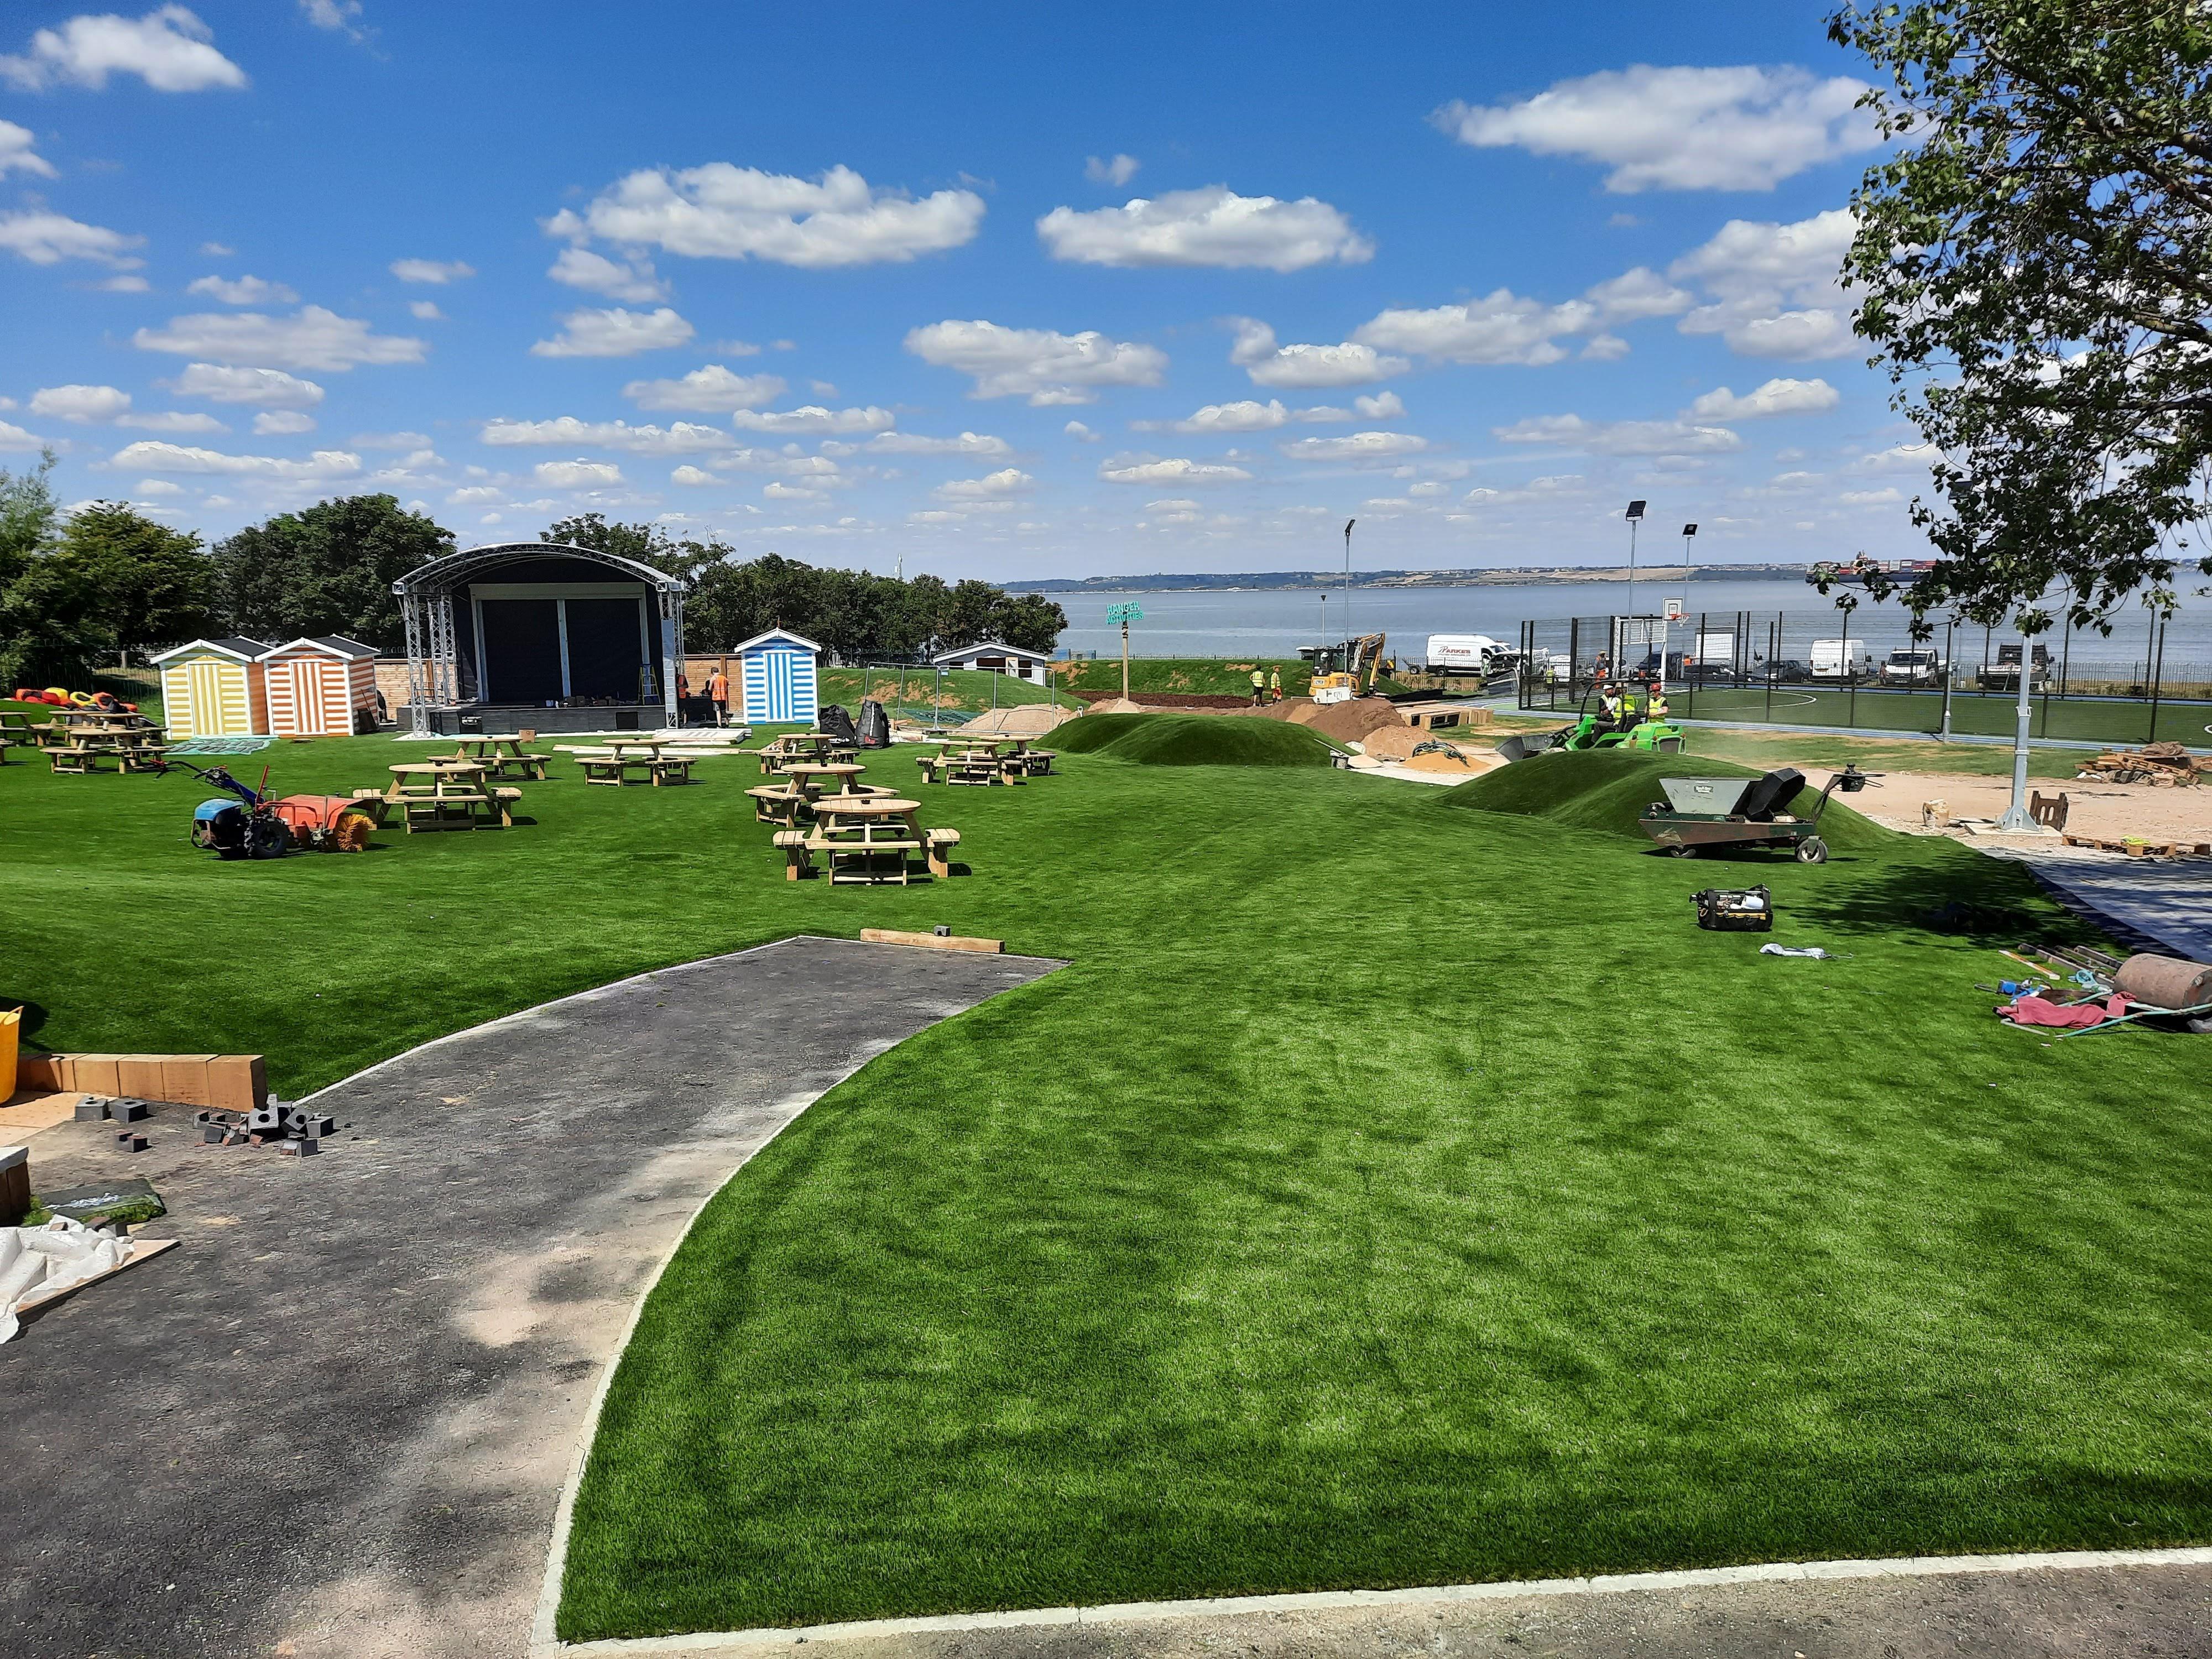 Artificial Lawn Options For Holiday Park Ground Maintenance